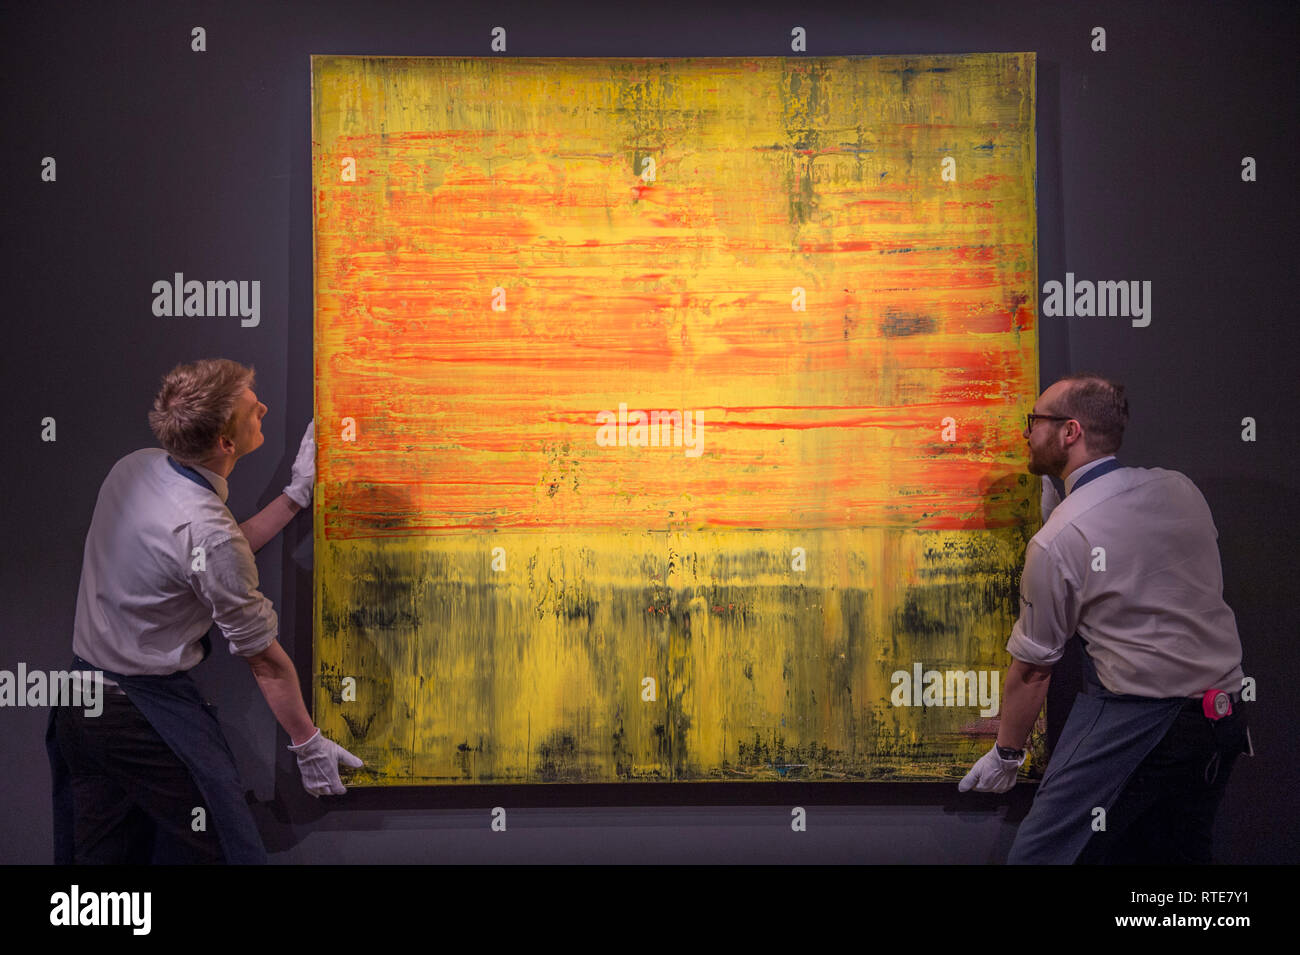 Sotheby's, New Bond Street, London, UK. 1st Mar, 2019. Contemporary Art sale preview. Gerhard Richter, Abstraktes Bild, 20098. Estimated at £6,000,000-8,000,000. The sale takes place on 5 March 2019. Credit: Malcolm Park/Alamy Live News Stock Photo